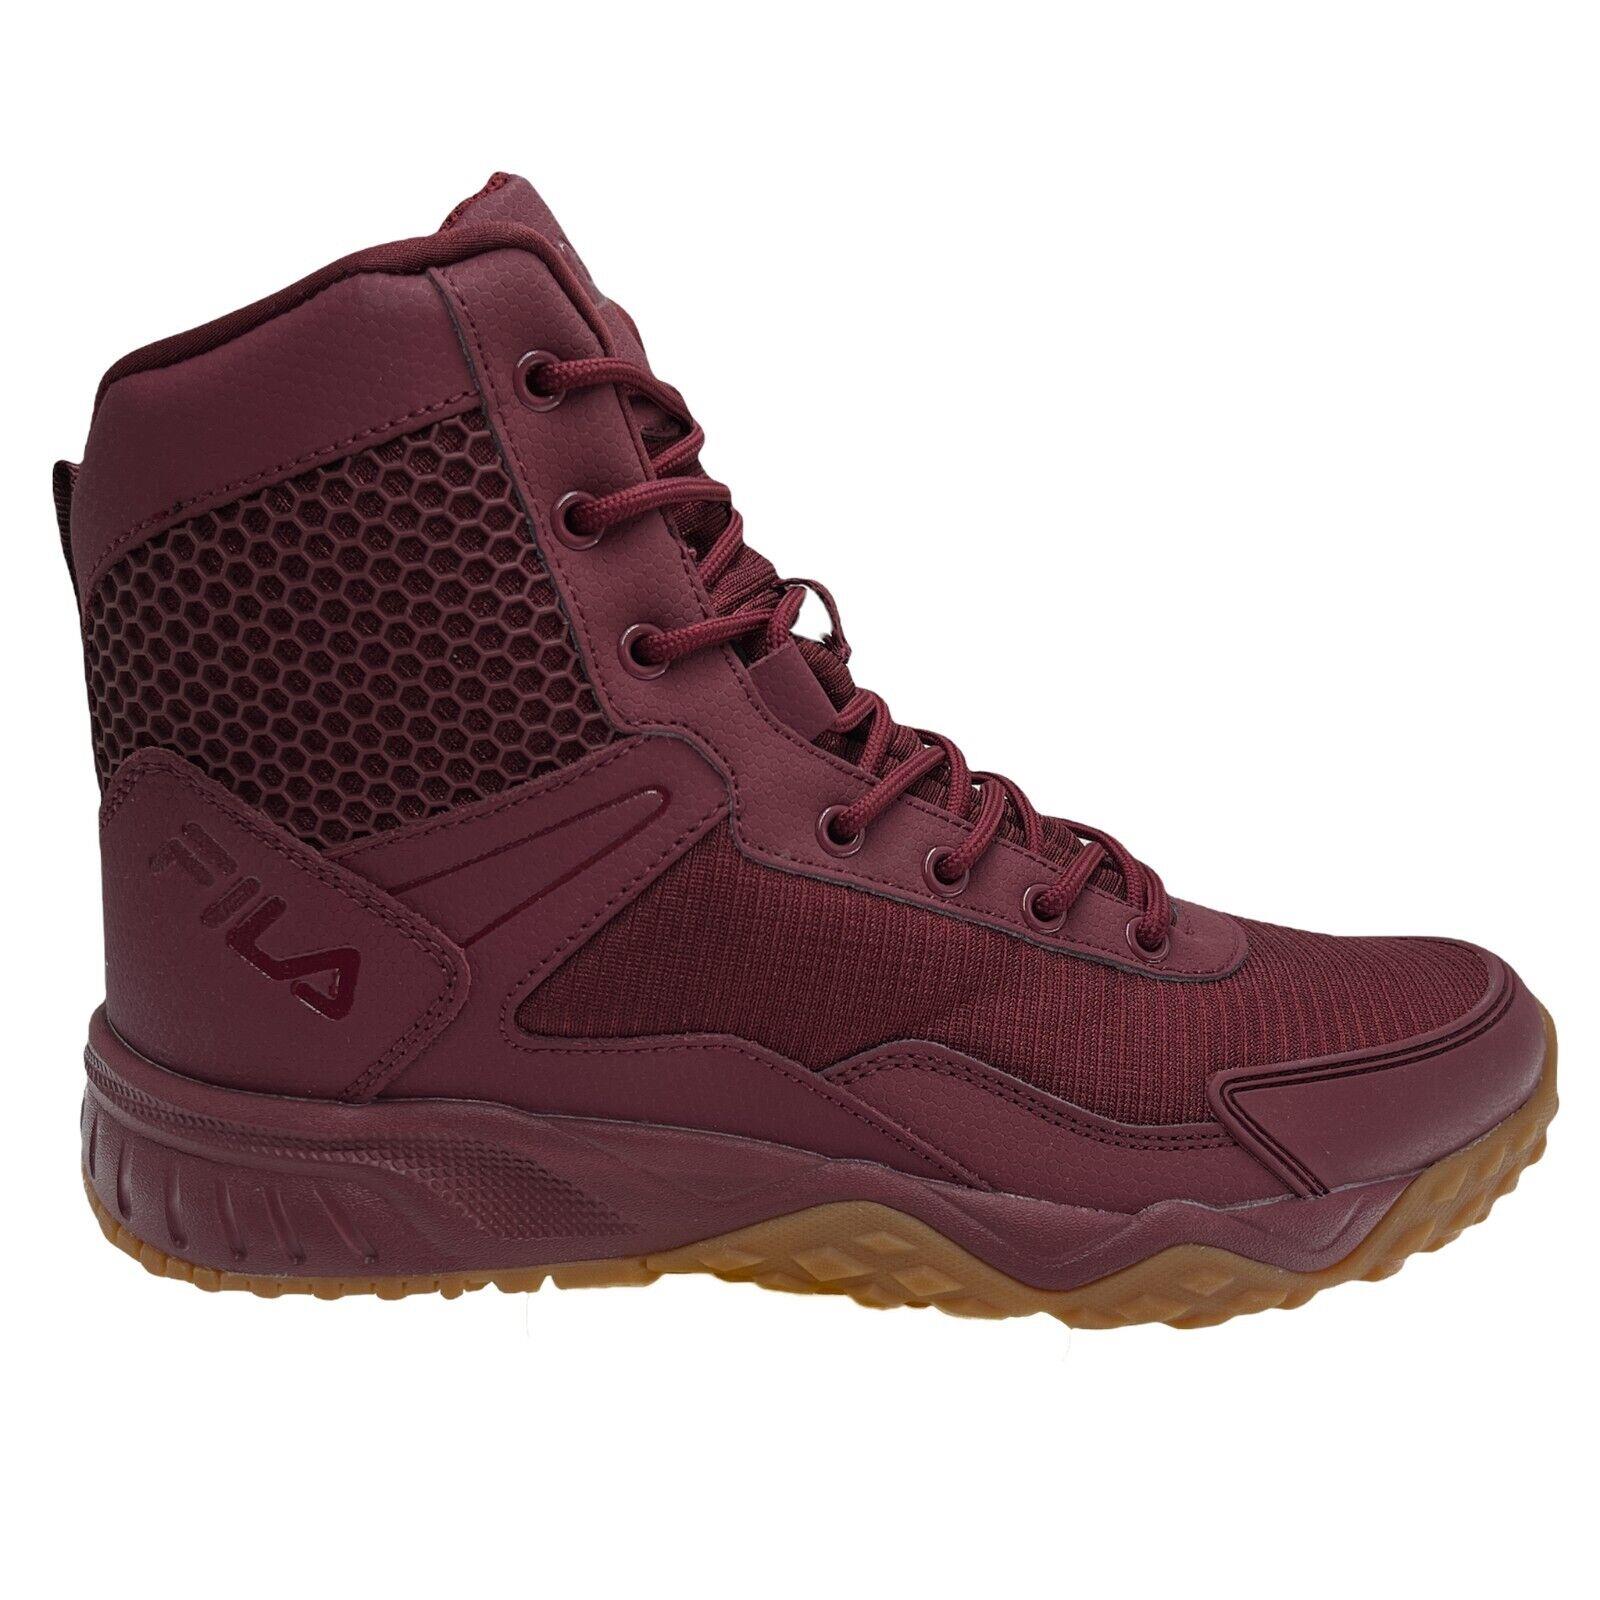 Men`s Fila Chastizer Mid High Top Tactical Rugged Work Boots Shoes Tawny Port / Gum